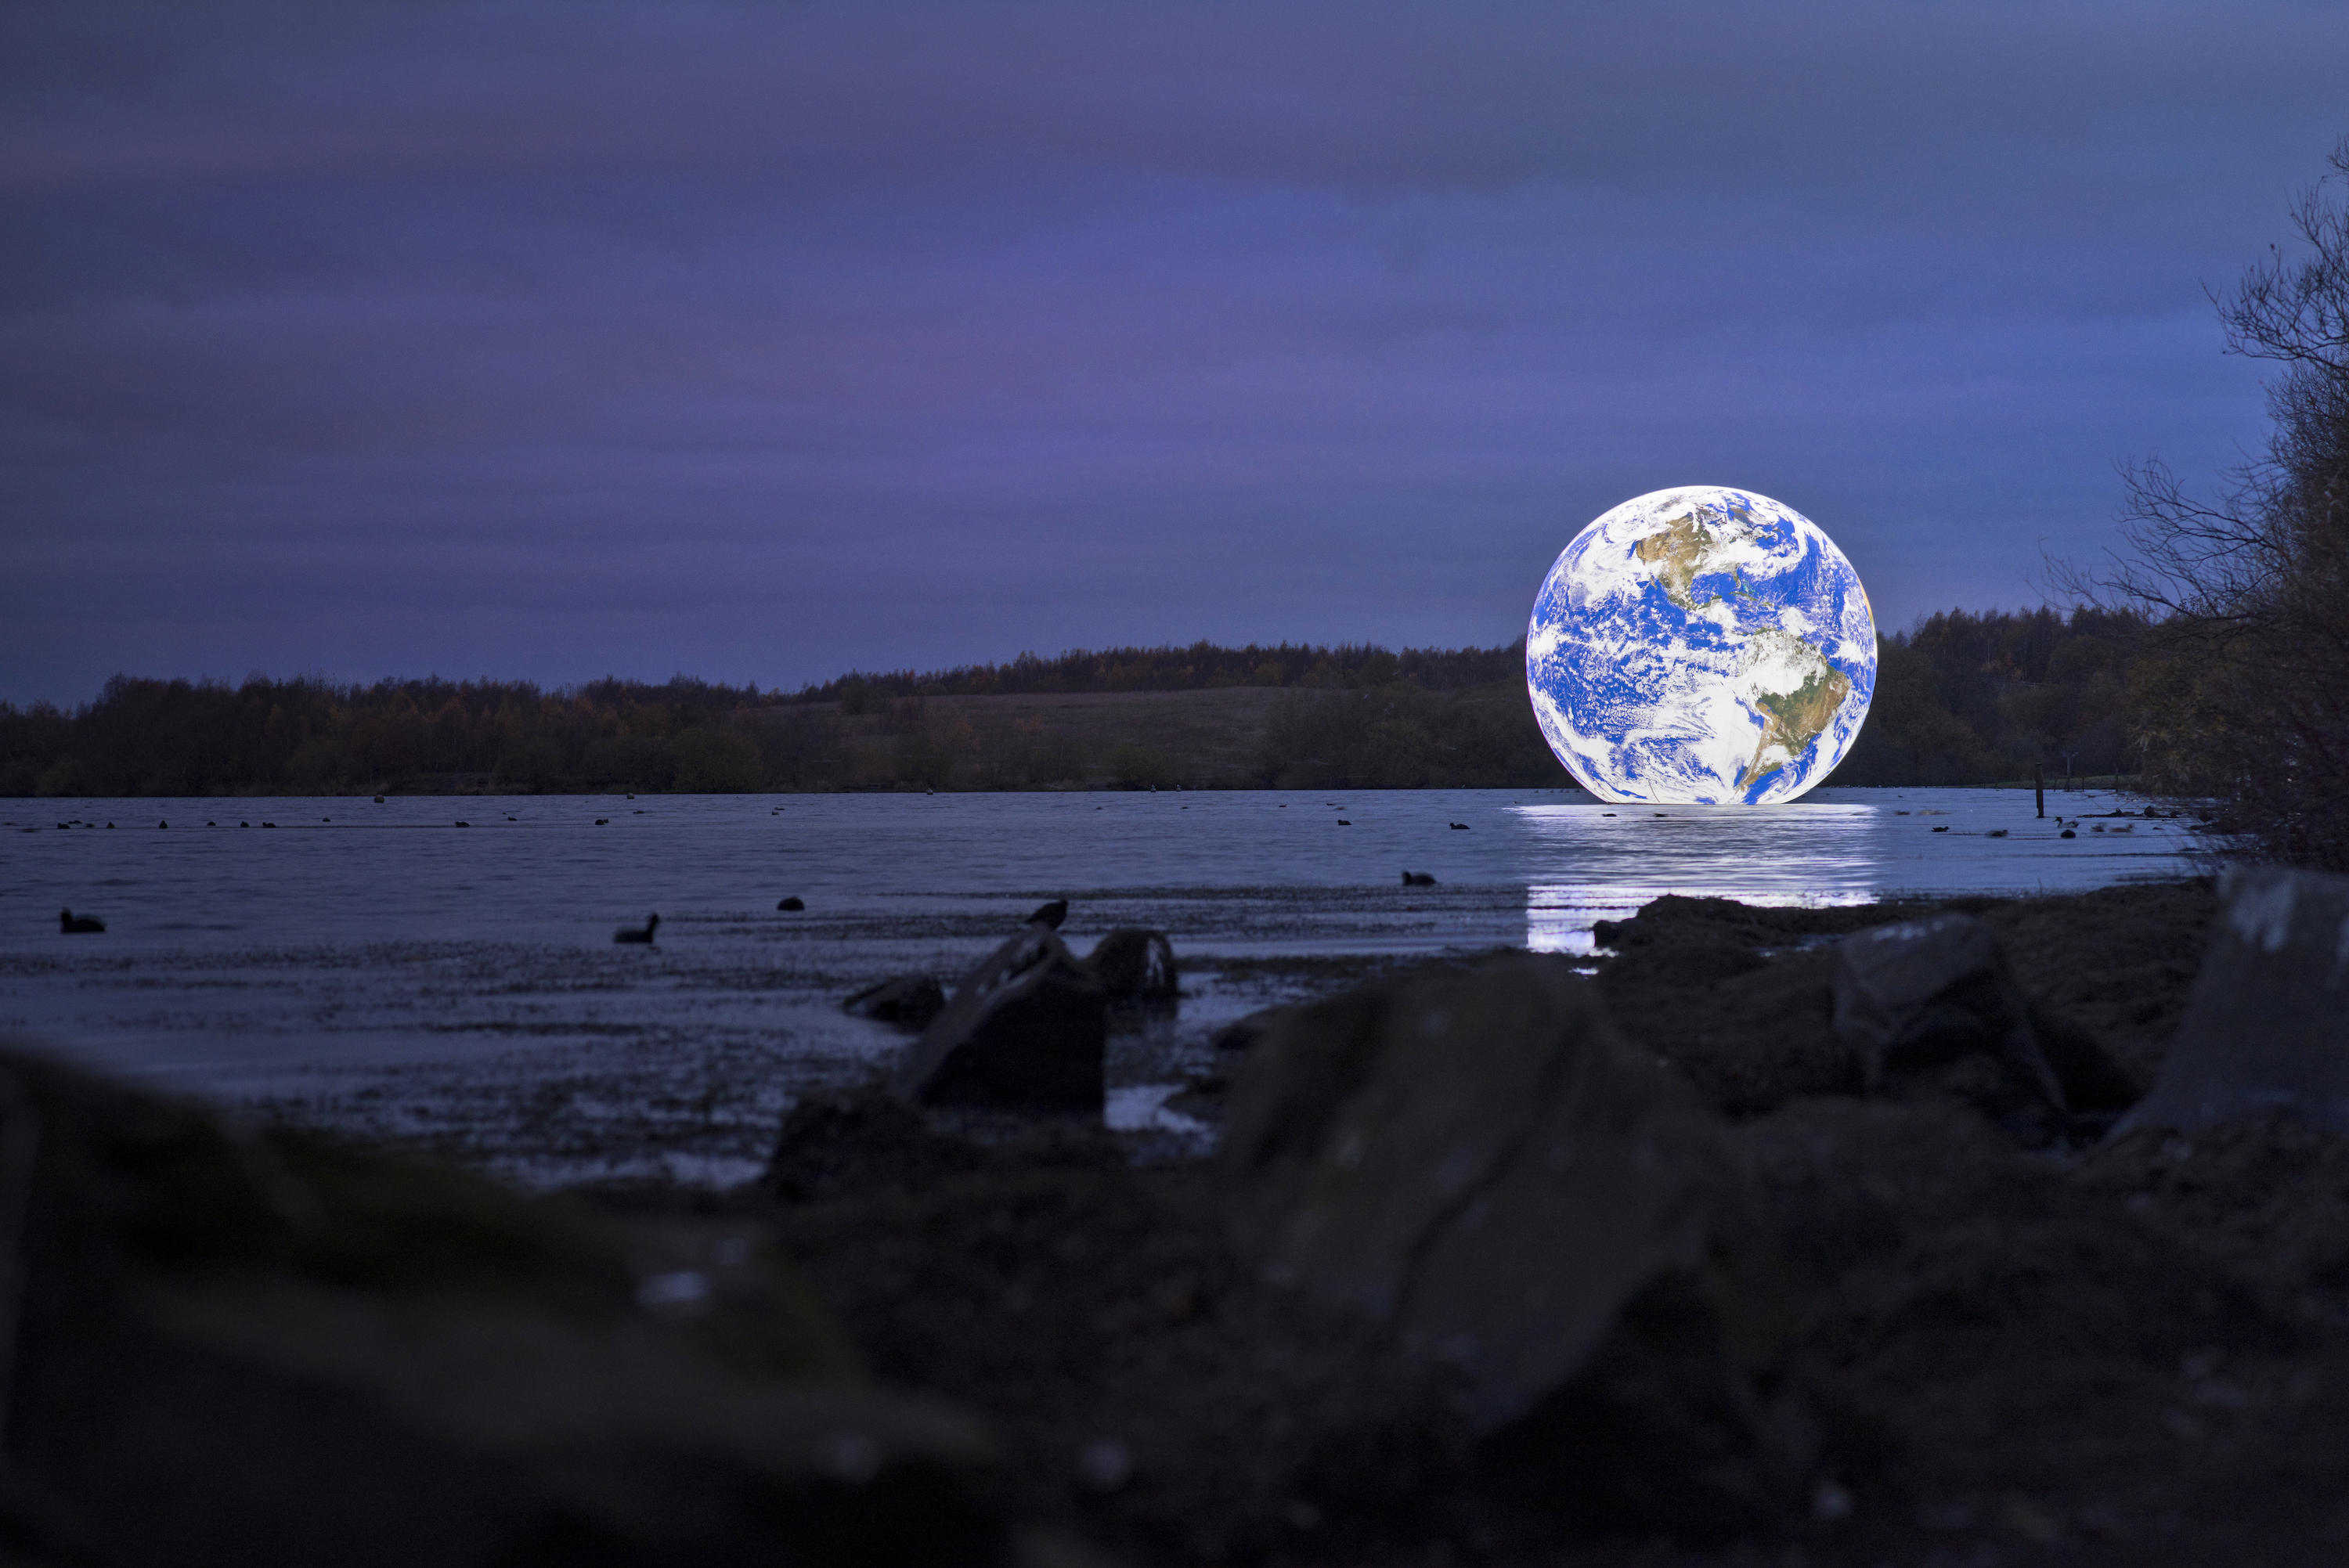 Outside view of the earth: festival opening on 16.05 with Luke Jerram's "Floating Earth